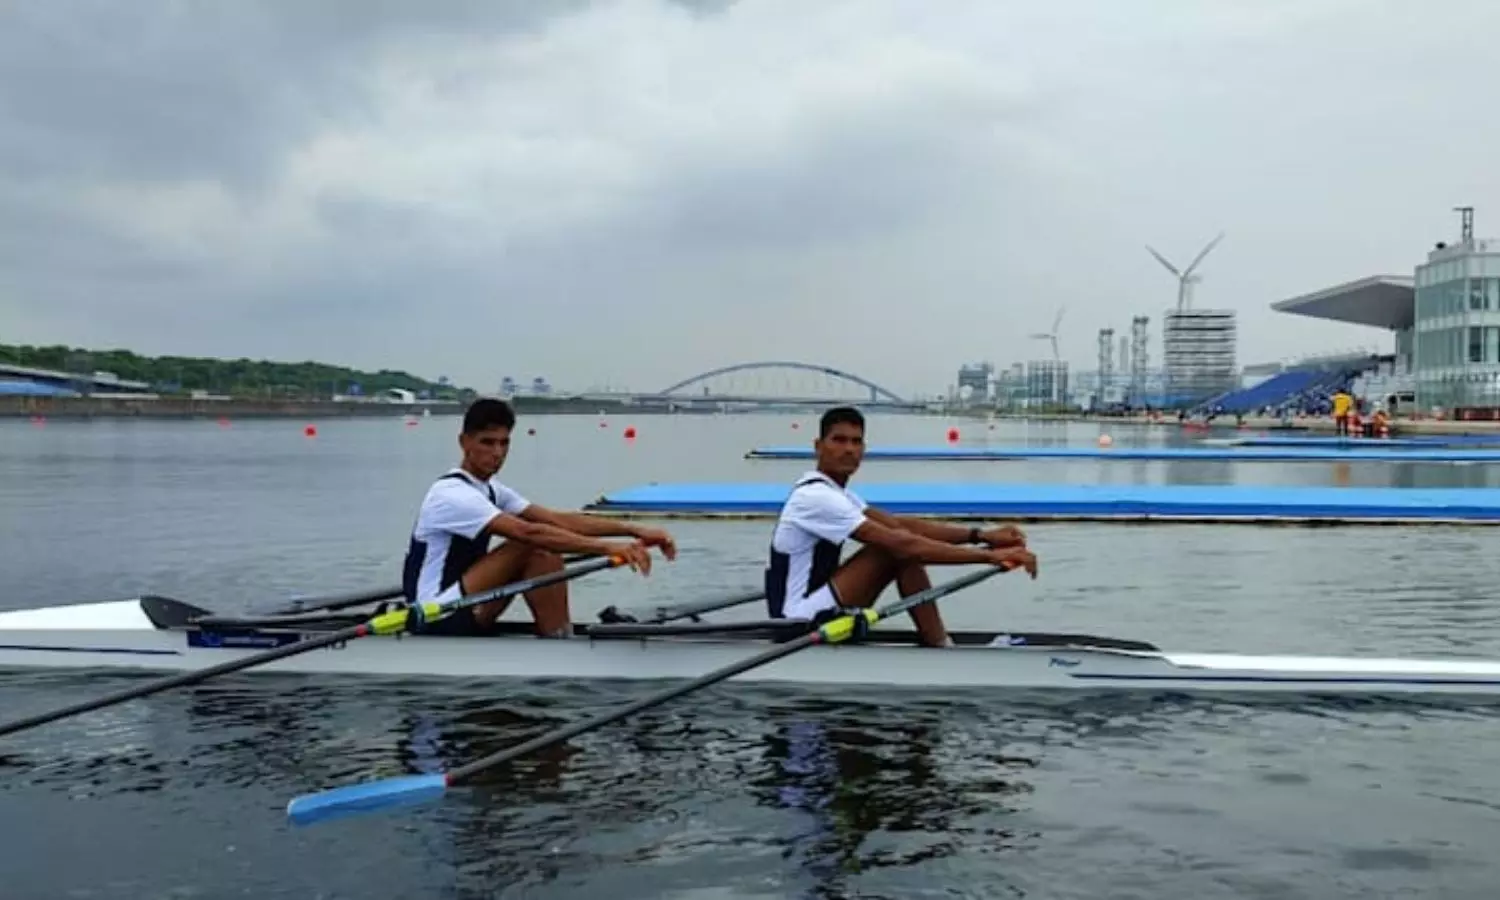 Tokyo Olympics Rowing Day 1, July 24- Double Scull duo Arvind Singh and Arjun Lal kick off their campaign